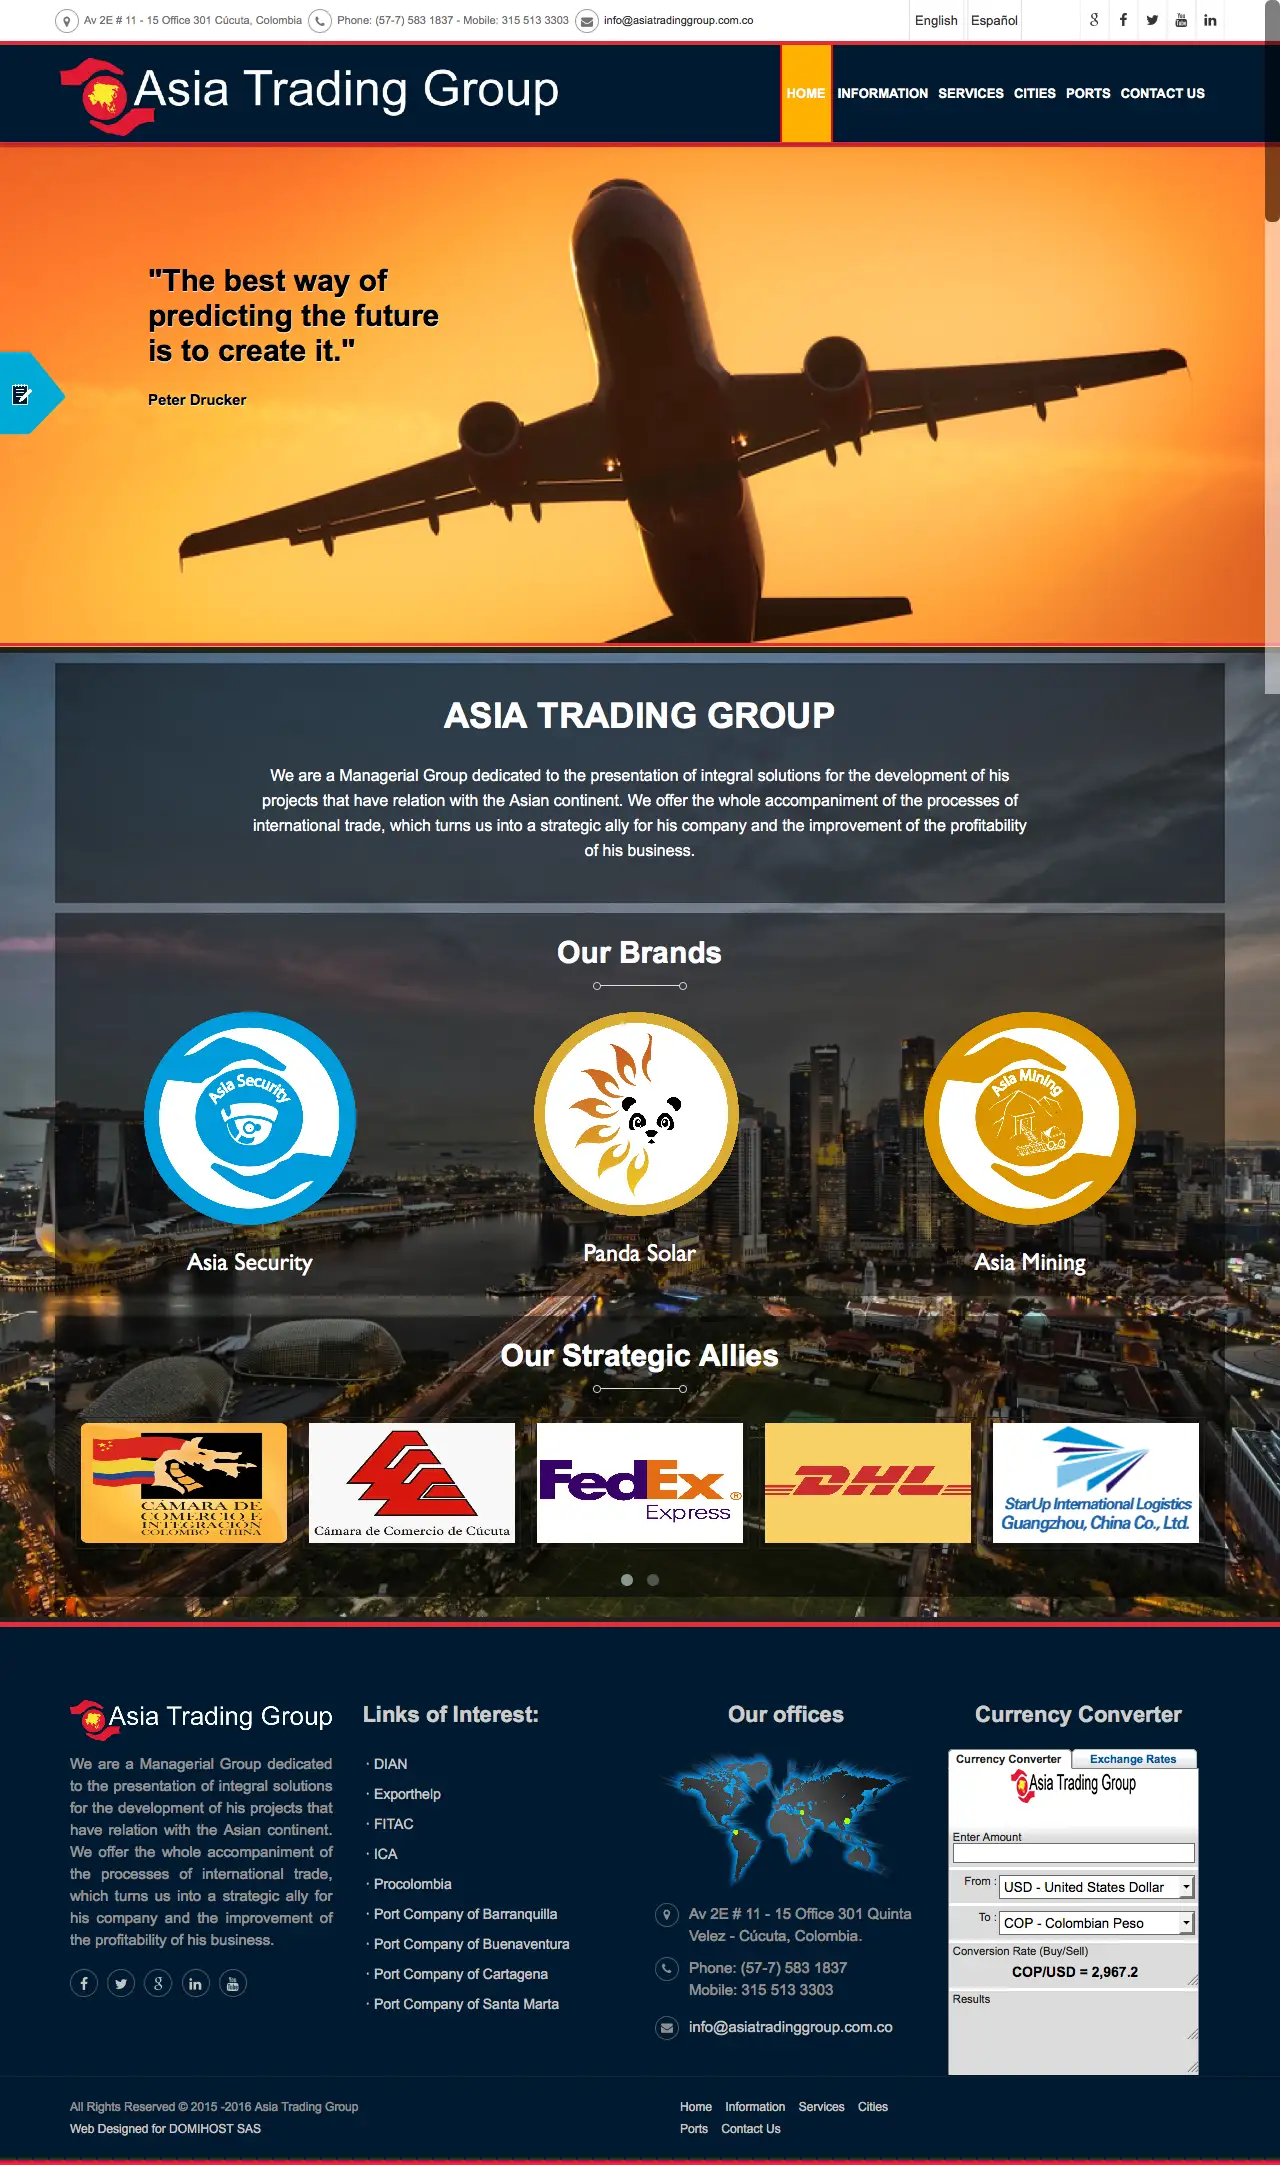 Asia Trading Group En.png